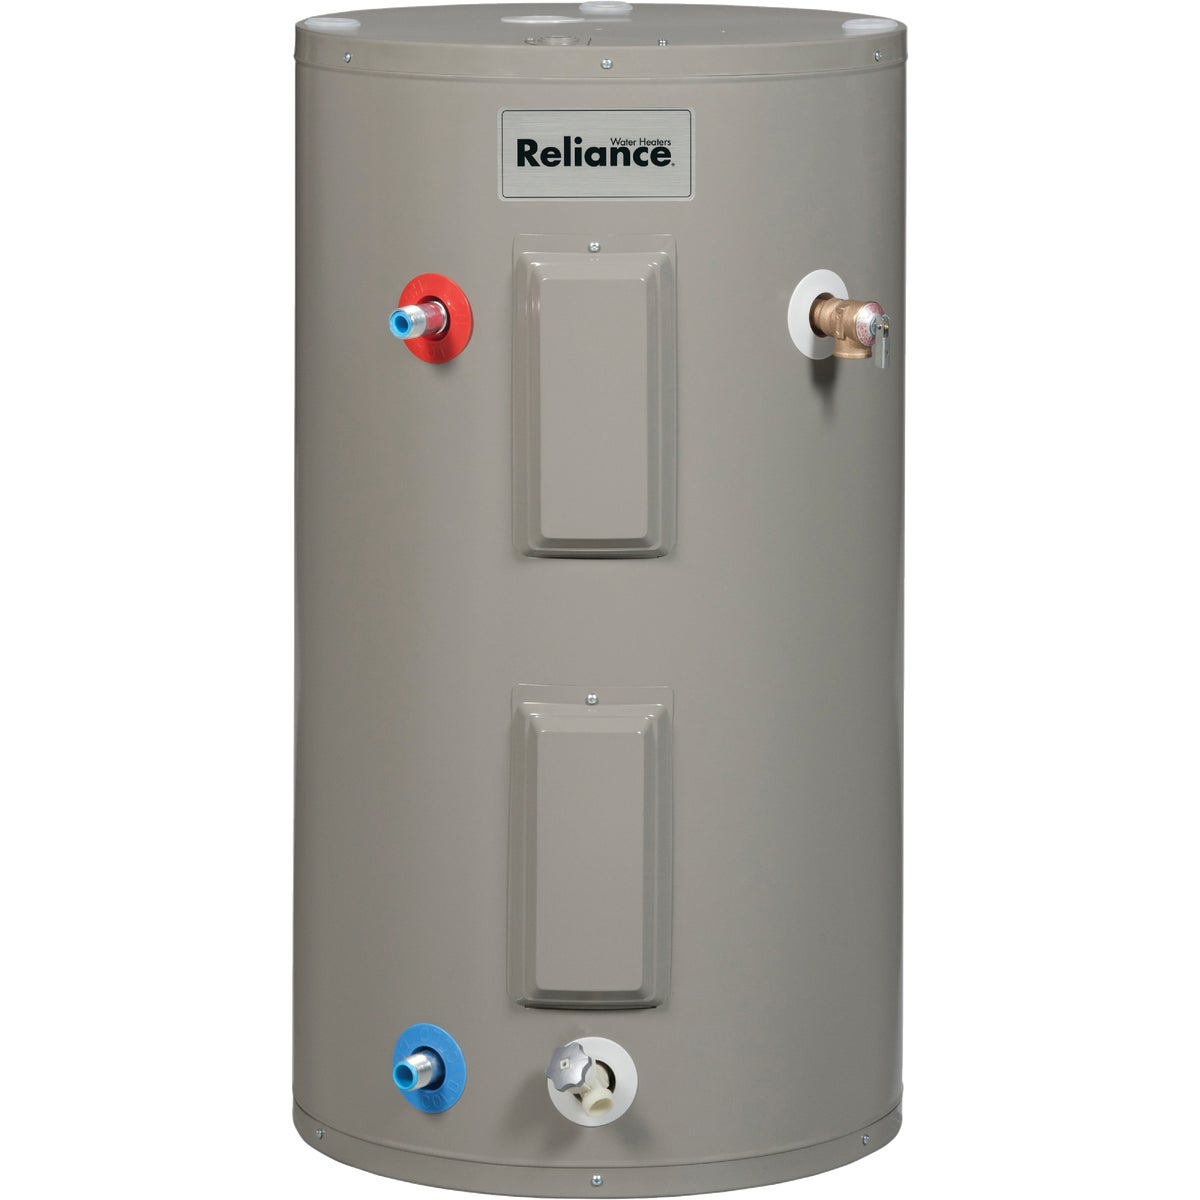 Item 401948, Reliance 40 gallon, electric water heater.